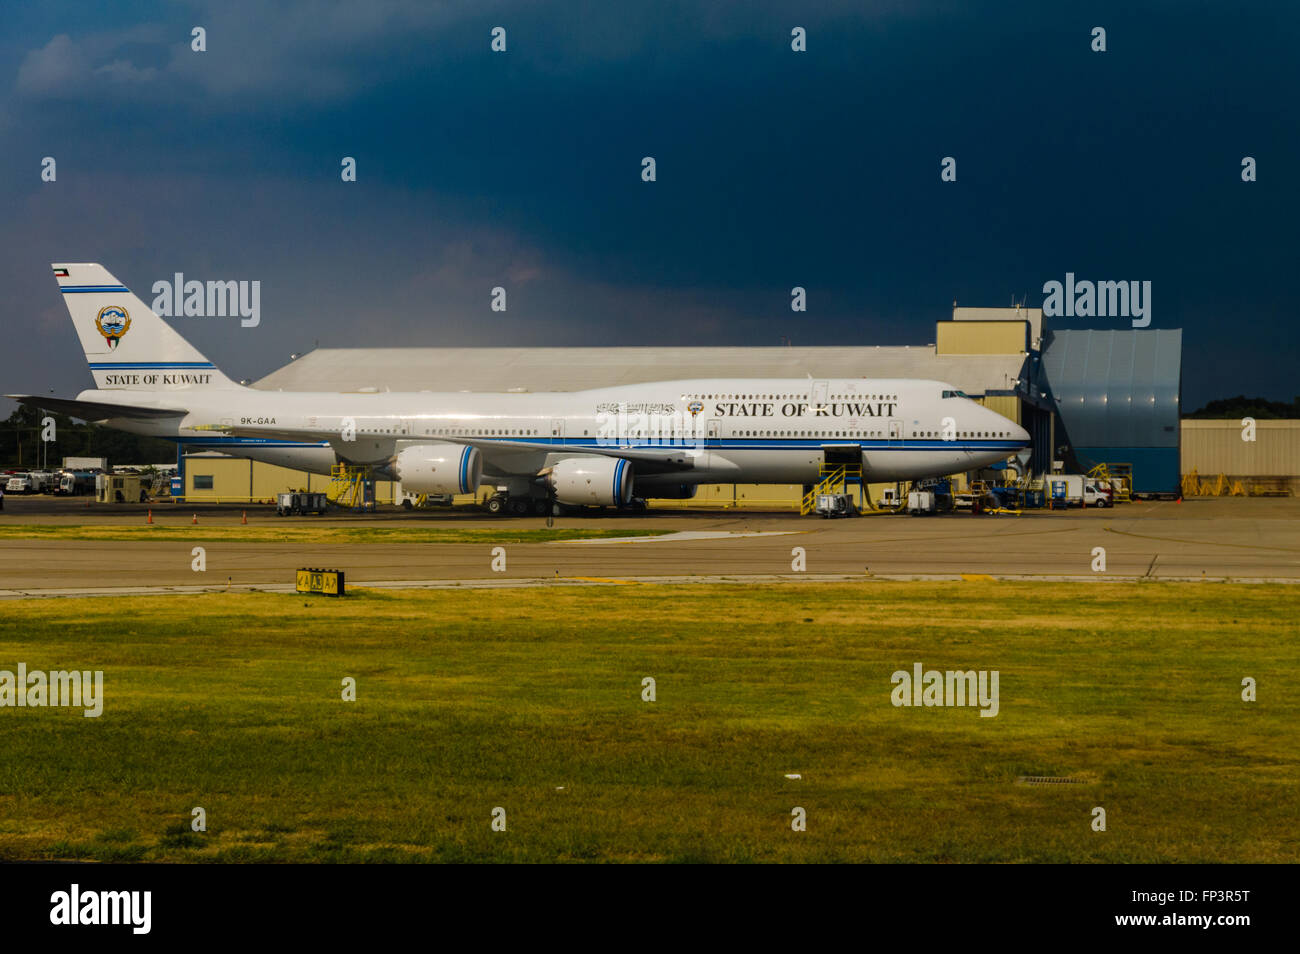 State of Kuwait Boeing 747 on the ground at Love Field, Dallas, Texas Stock Photo